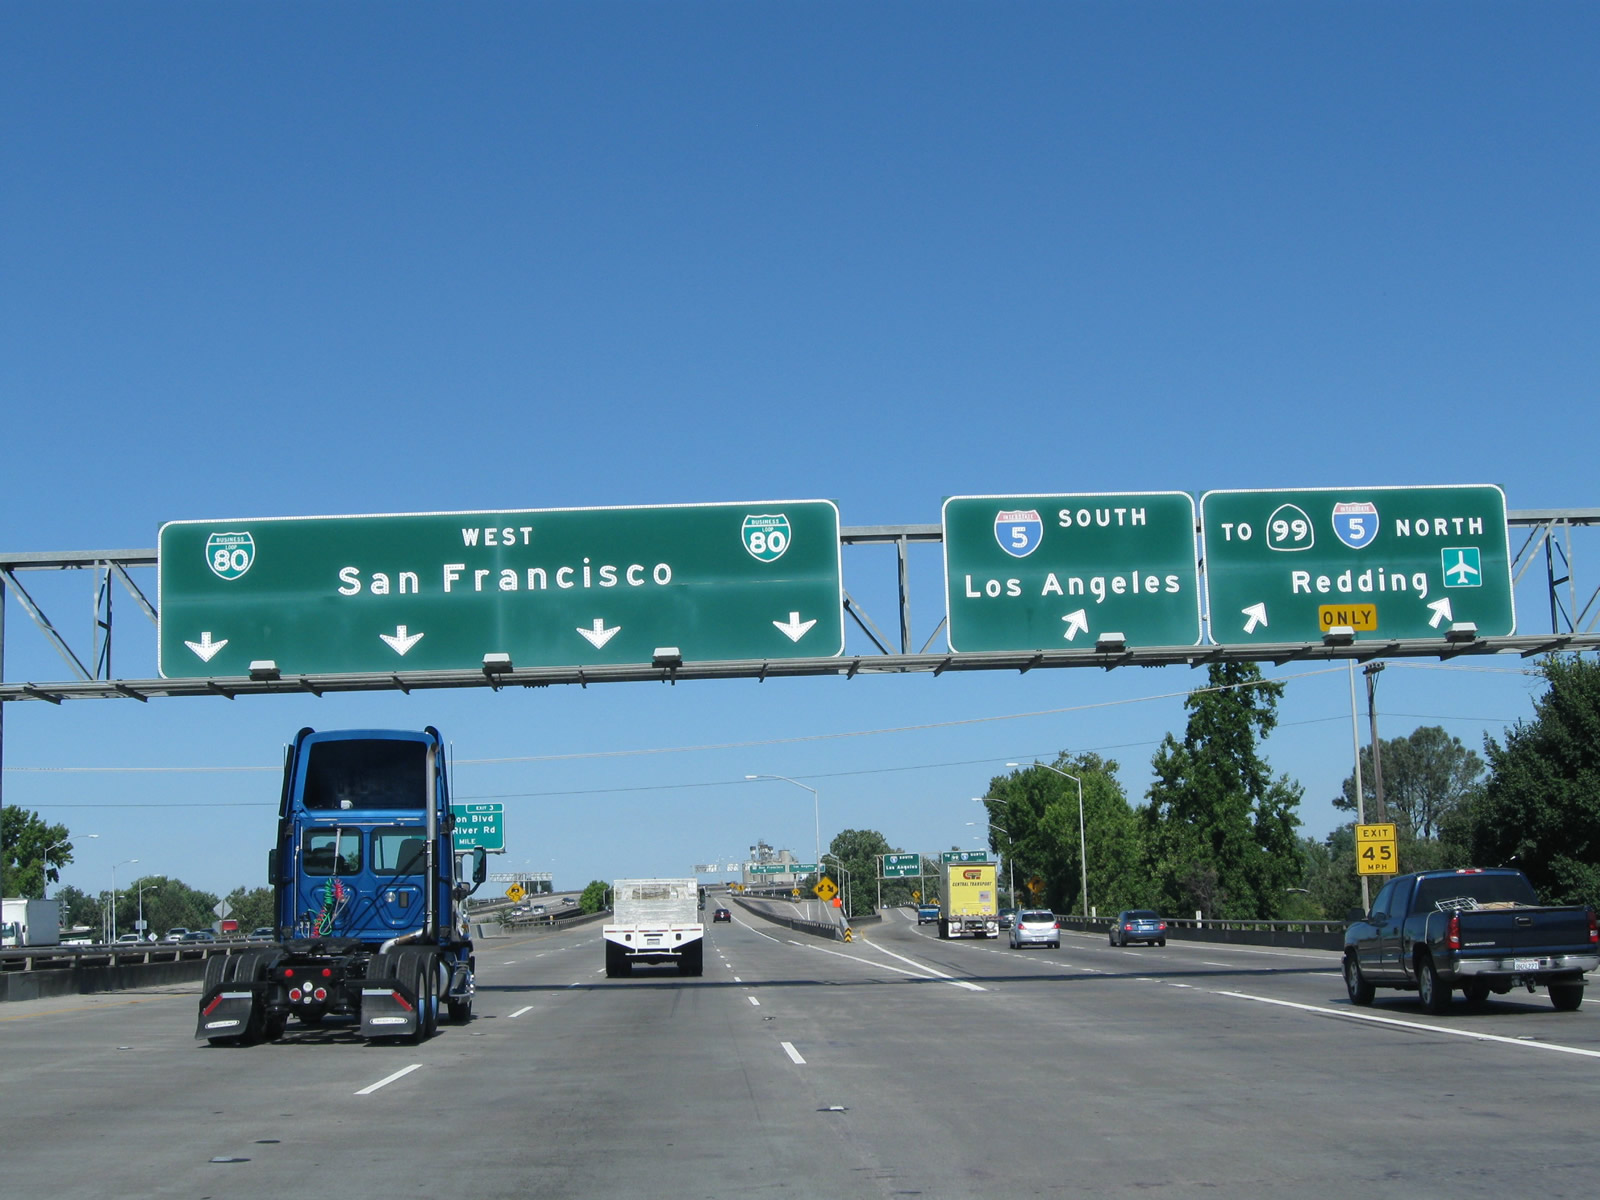 Road signs in California for I-5 South